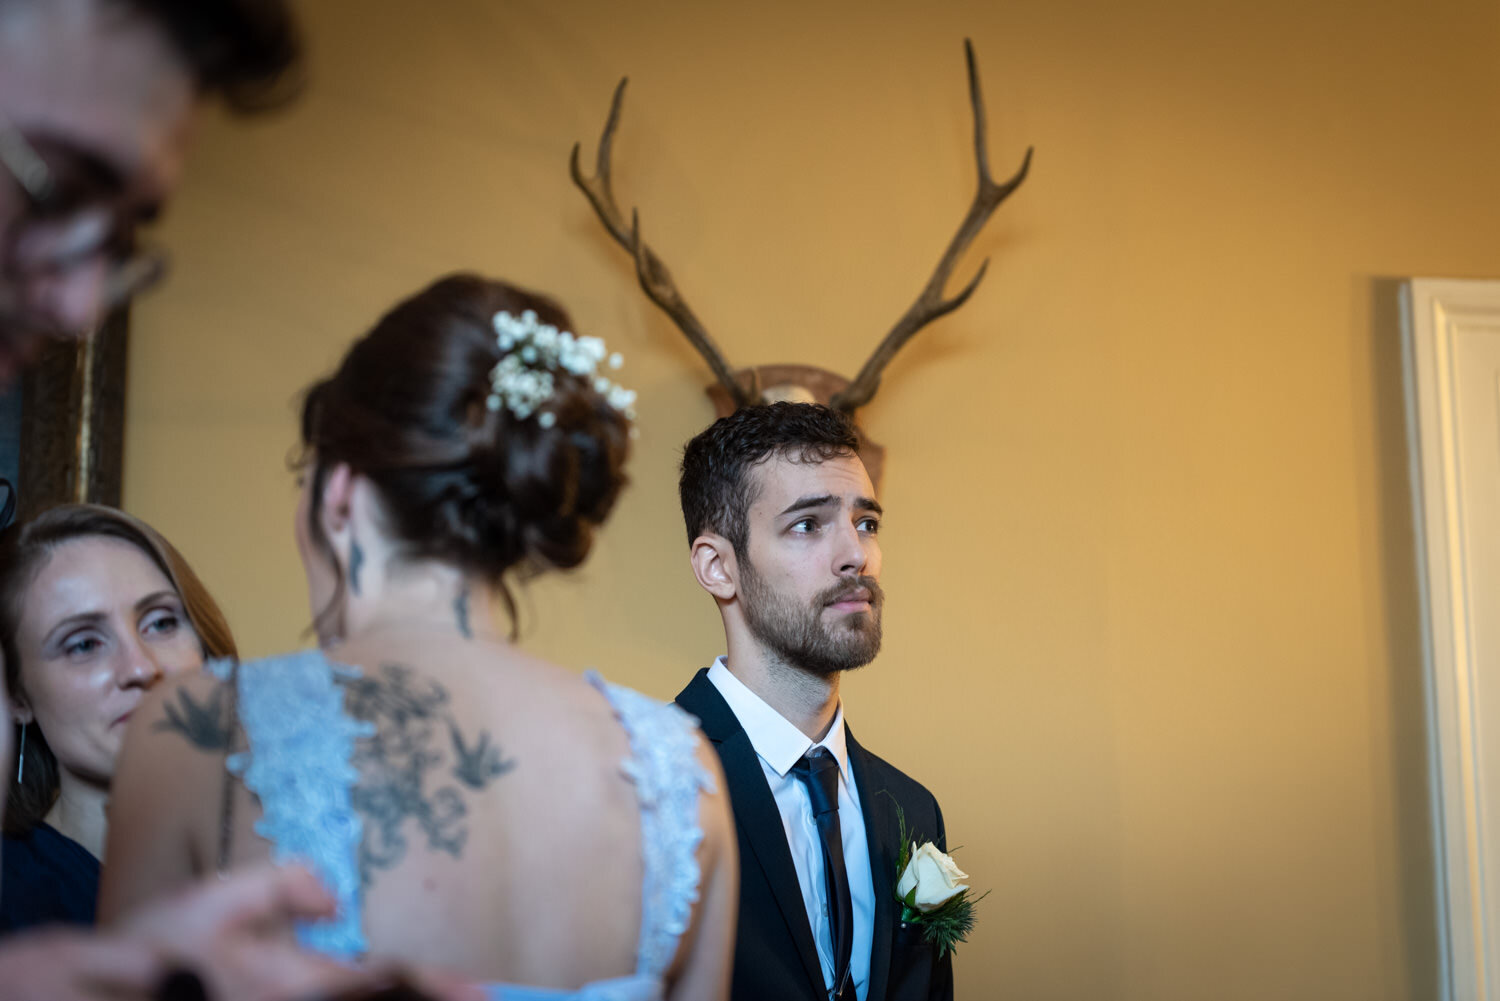 Wedding guest with antlers!